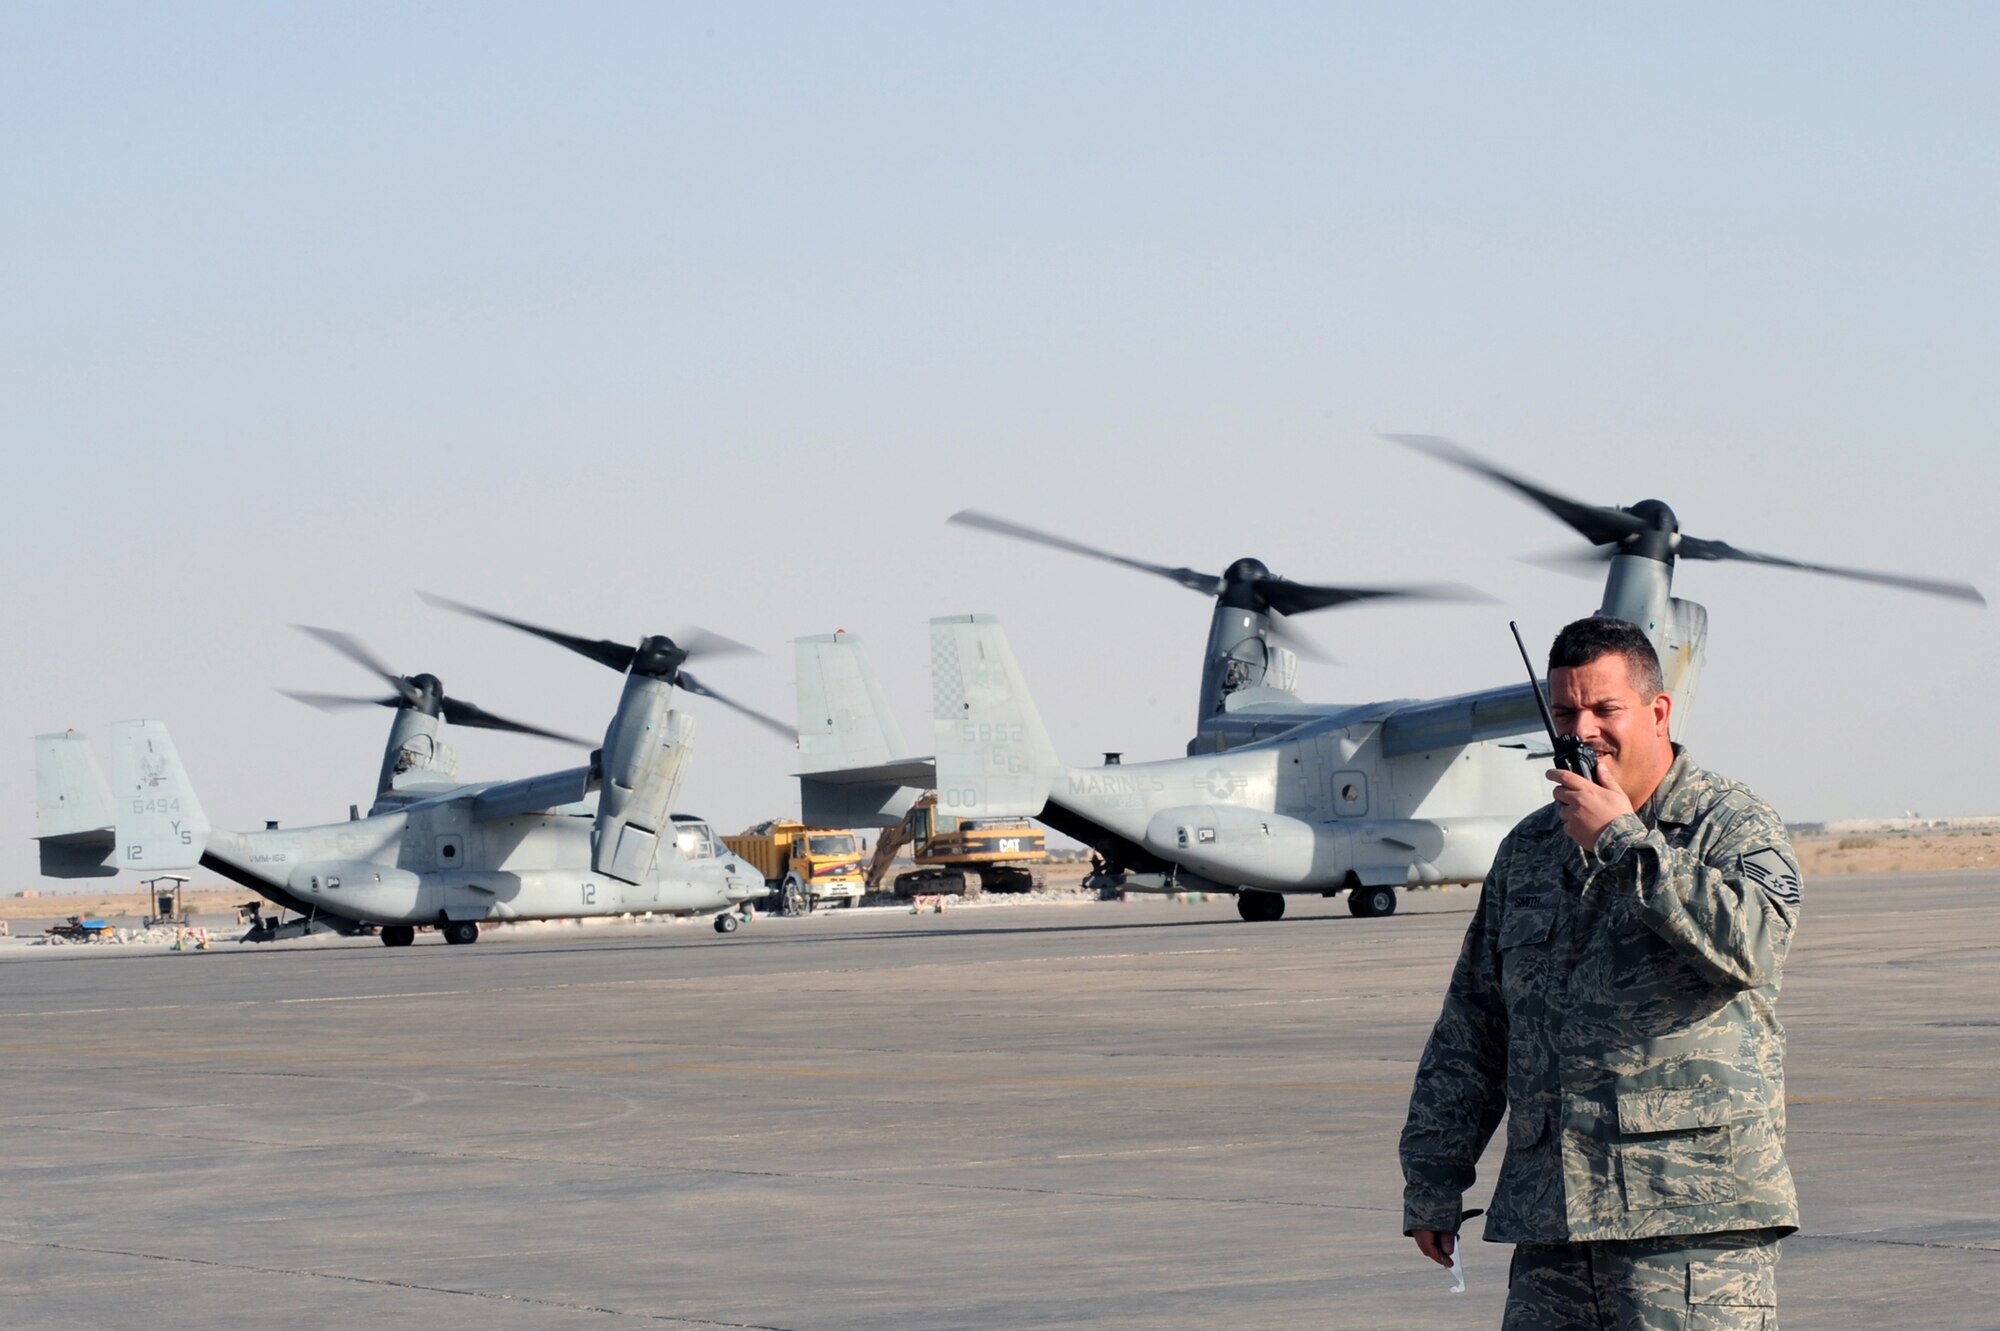 ALI BASE, Iraq -- Master Sgt. Matthew Smith, 407th Expeditionary Operations Squadron airfield manager, keeps in contact with the Air Traffic Control during the takeoff of two, V-22 Osprey's here April 24.  The V-22 Osprey is an aircraft used to transport Airmen, Troops, and cargo.  Sergeant Smith is deployed from McConnell AFB, Kan. (U. S. Air Force photo / Tech. Sgt. Sabrina Johnson)